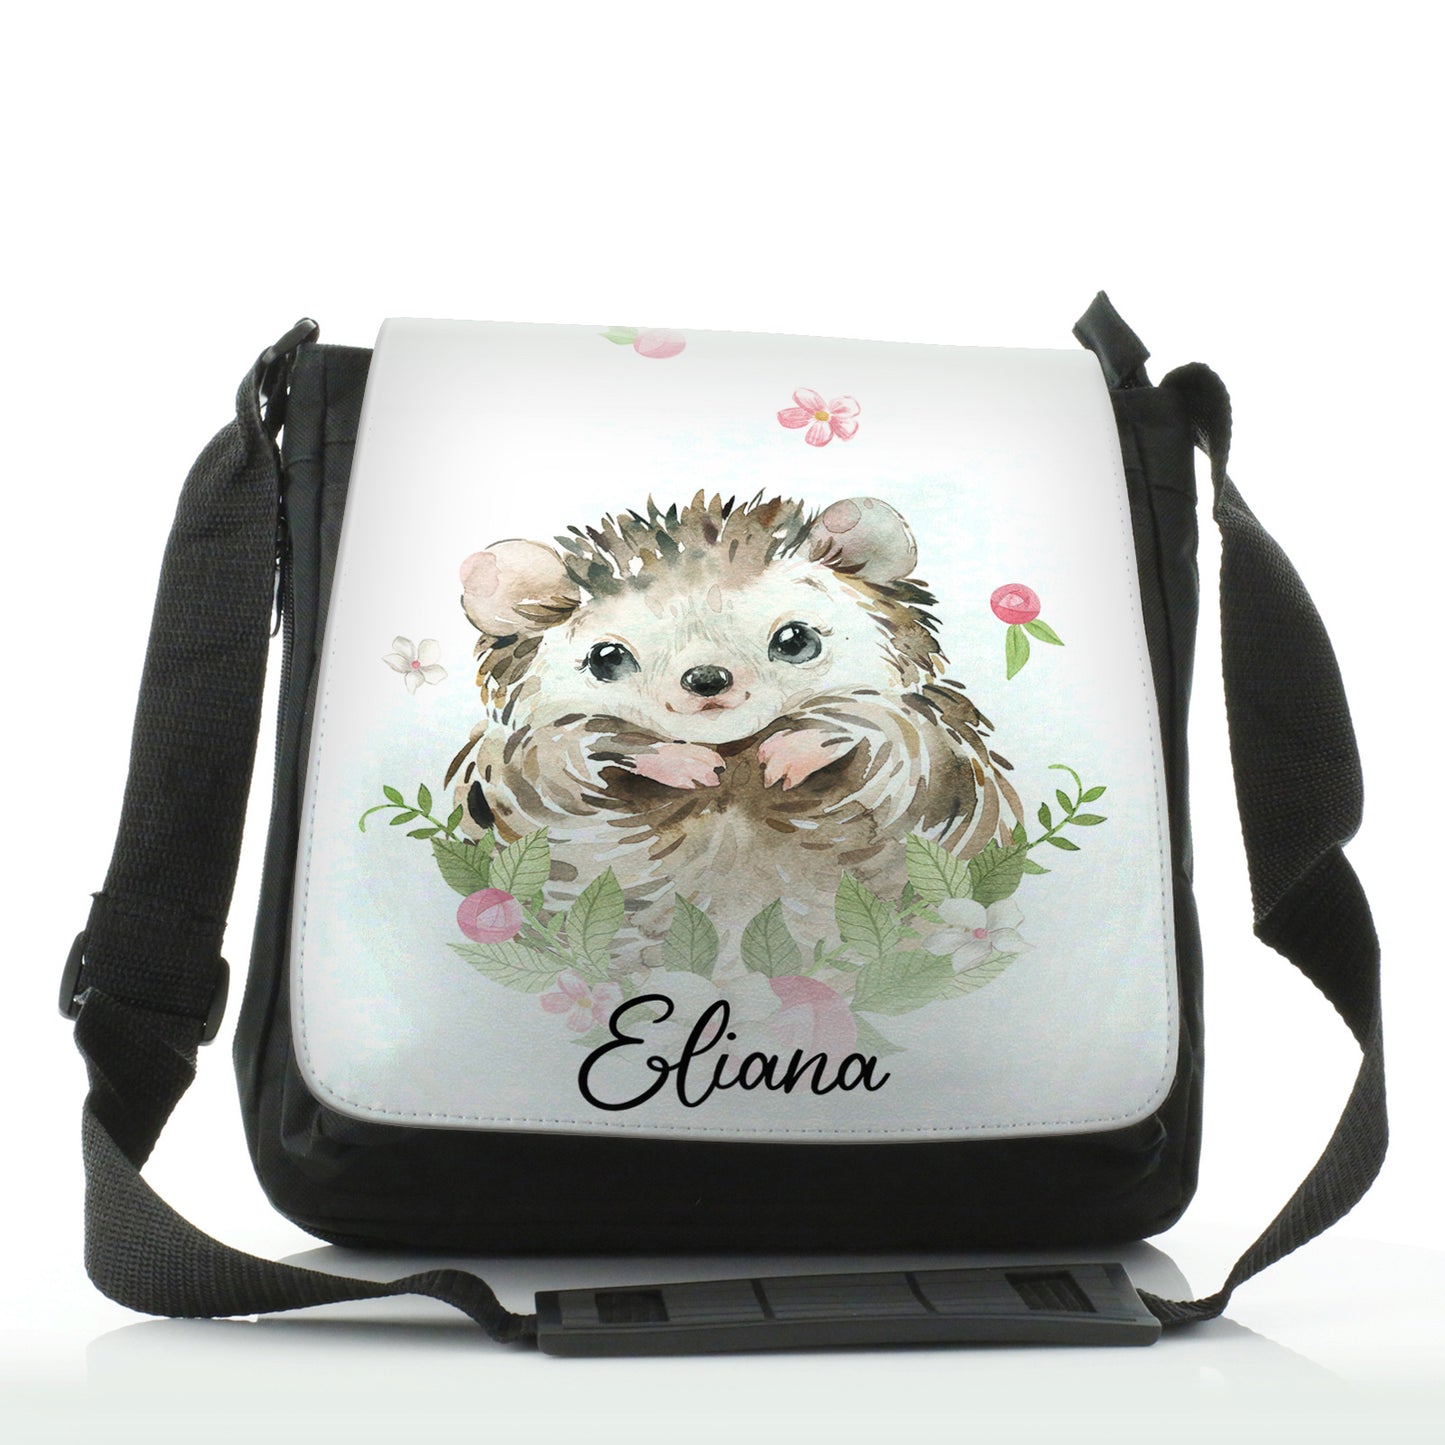 Personalised Shoulder Bag with Hedgehog Pink Flowers and Cute Text